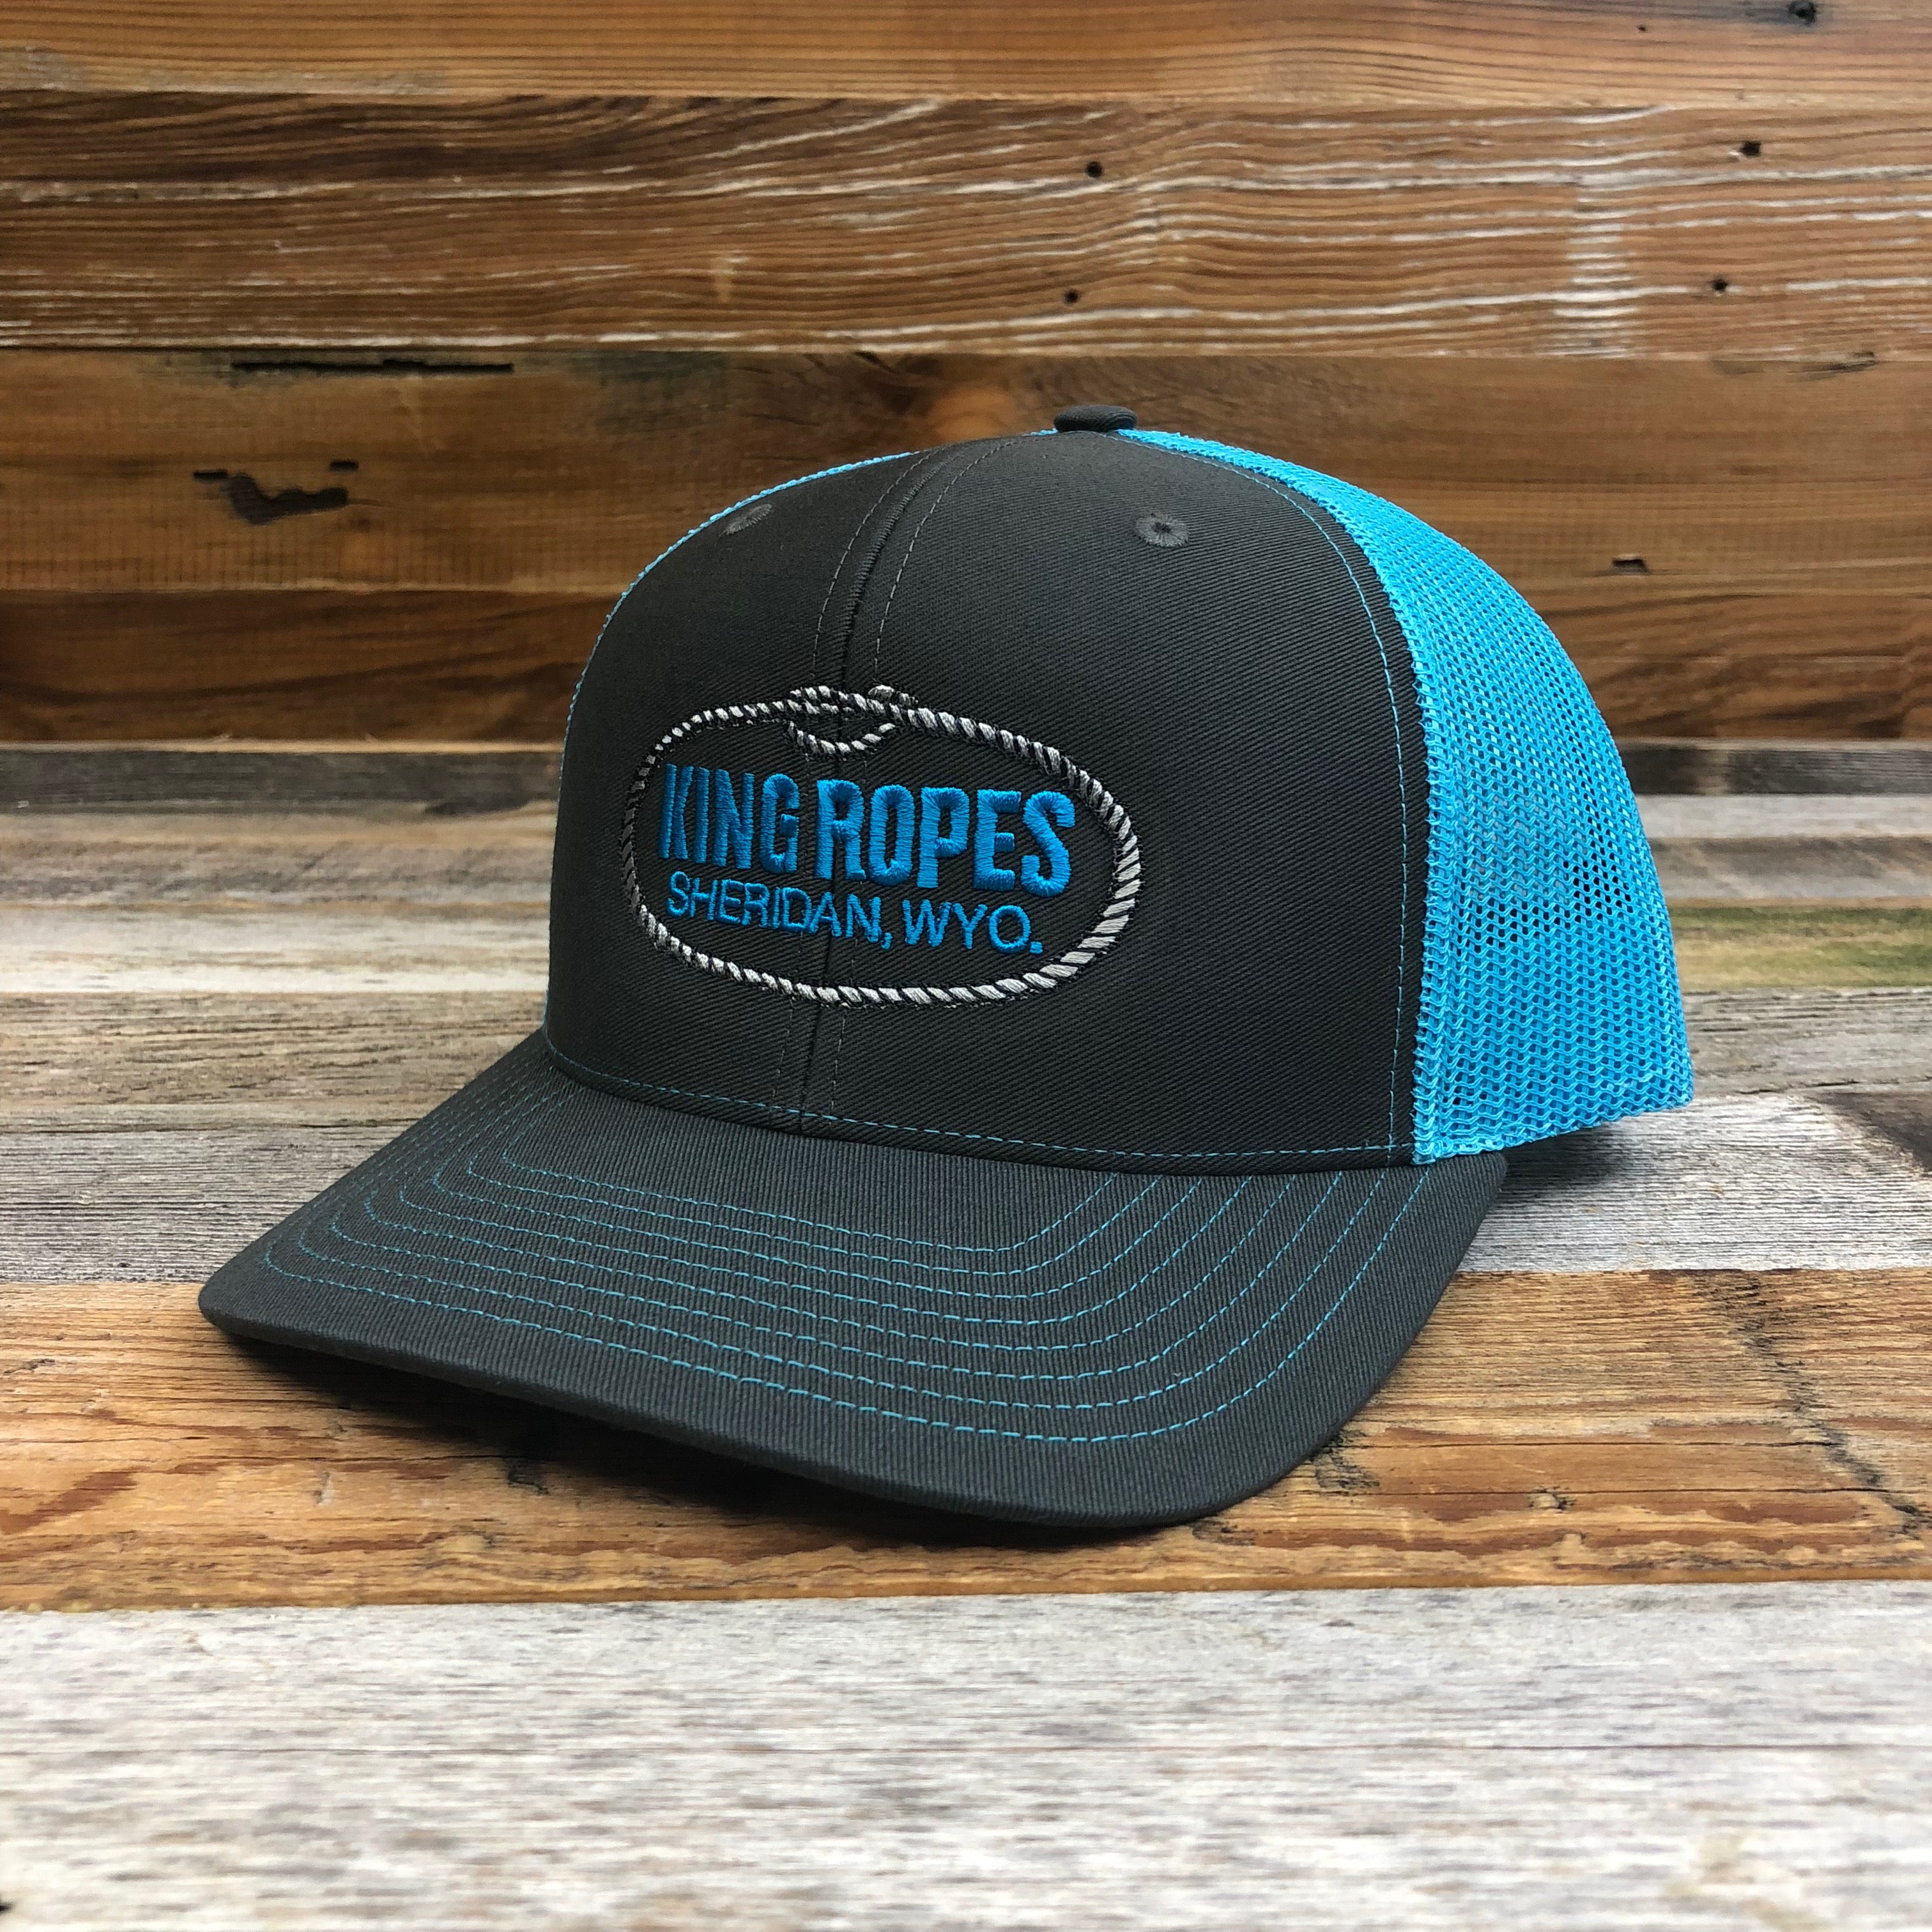 Brookings Blue Line Bar Square Rope Hat